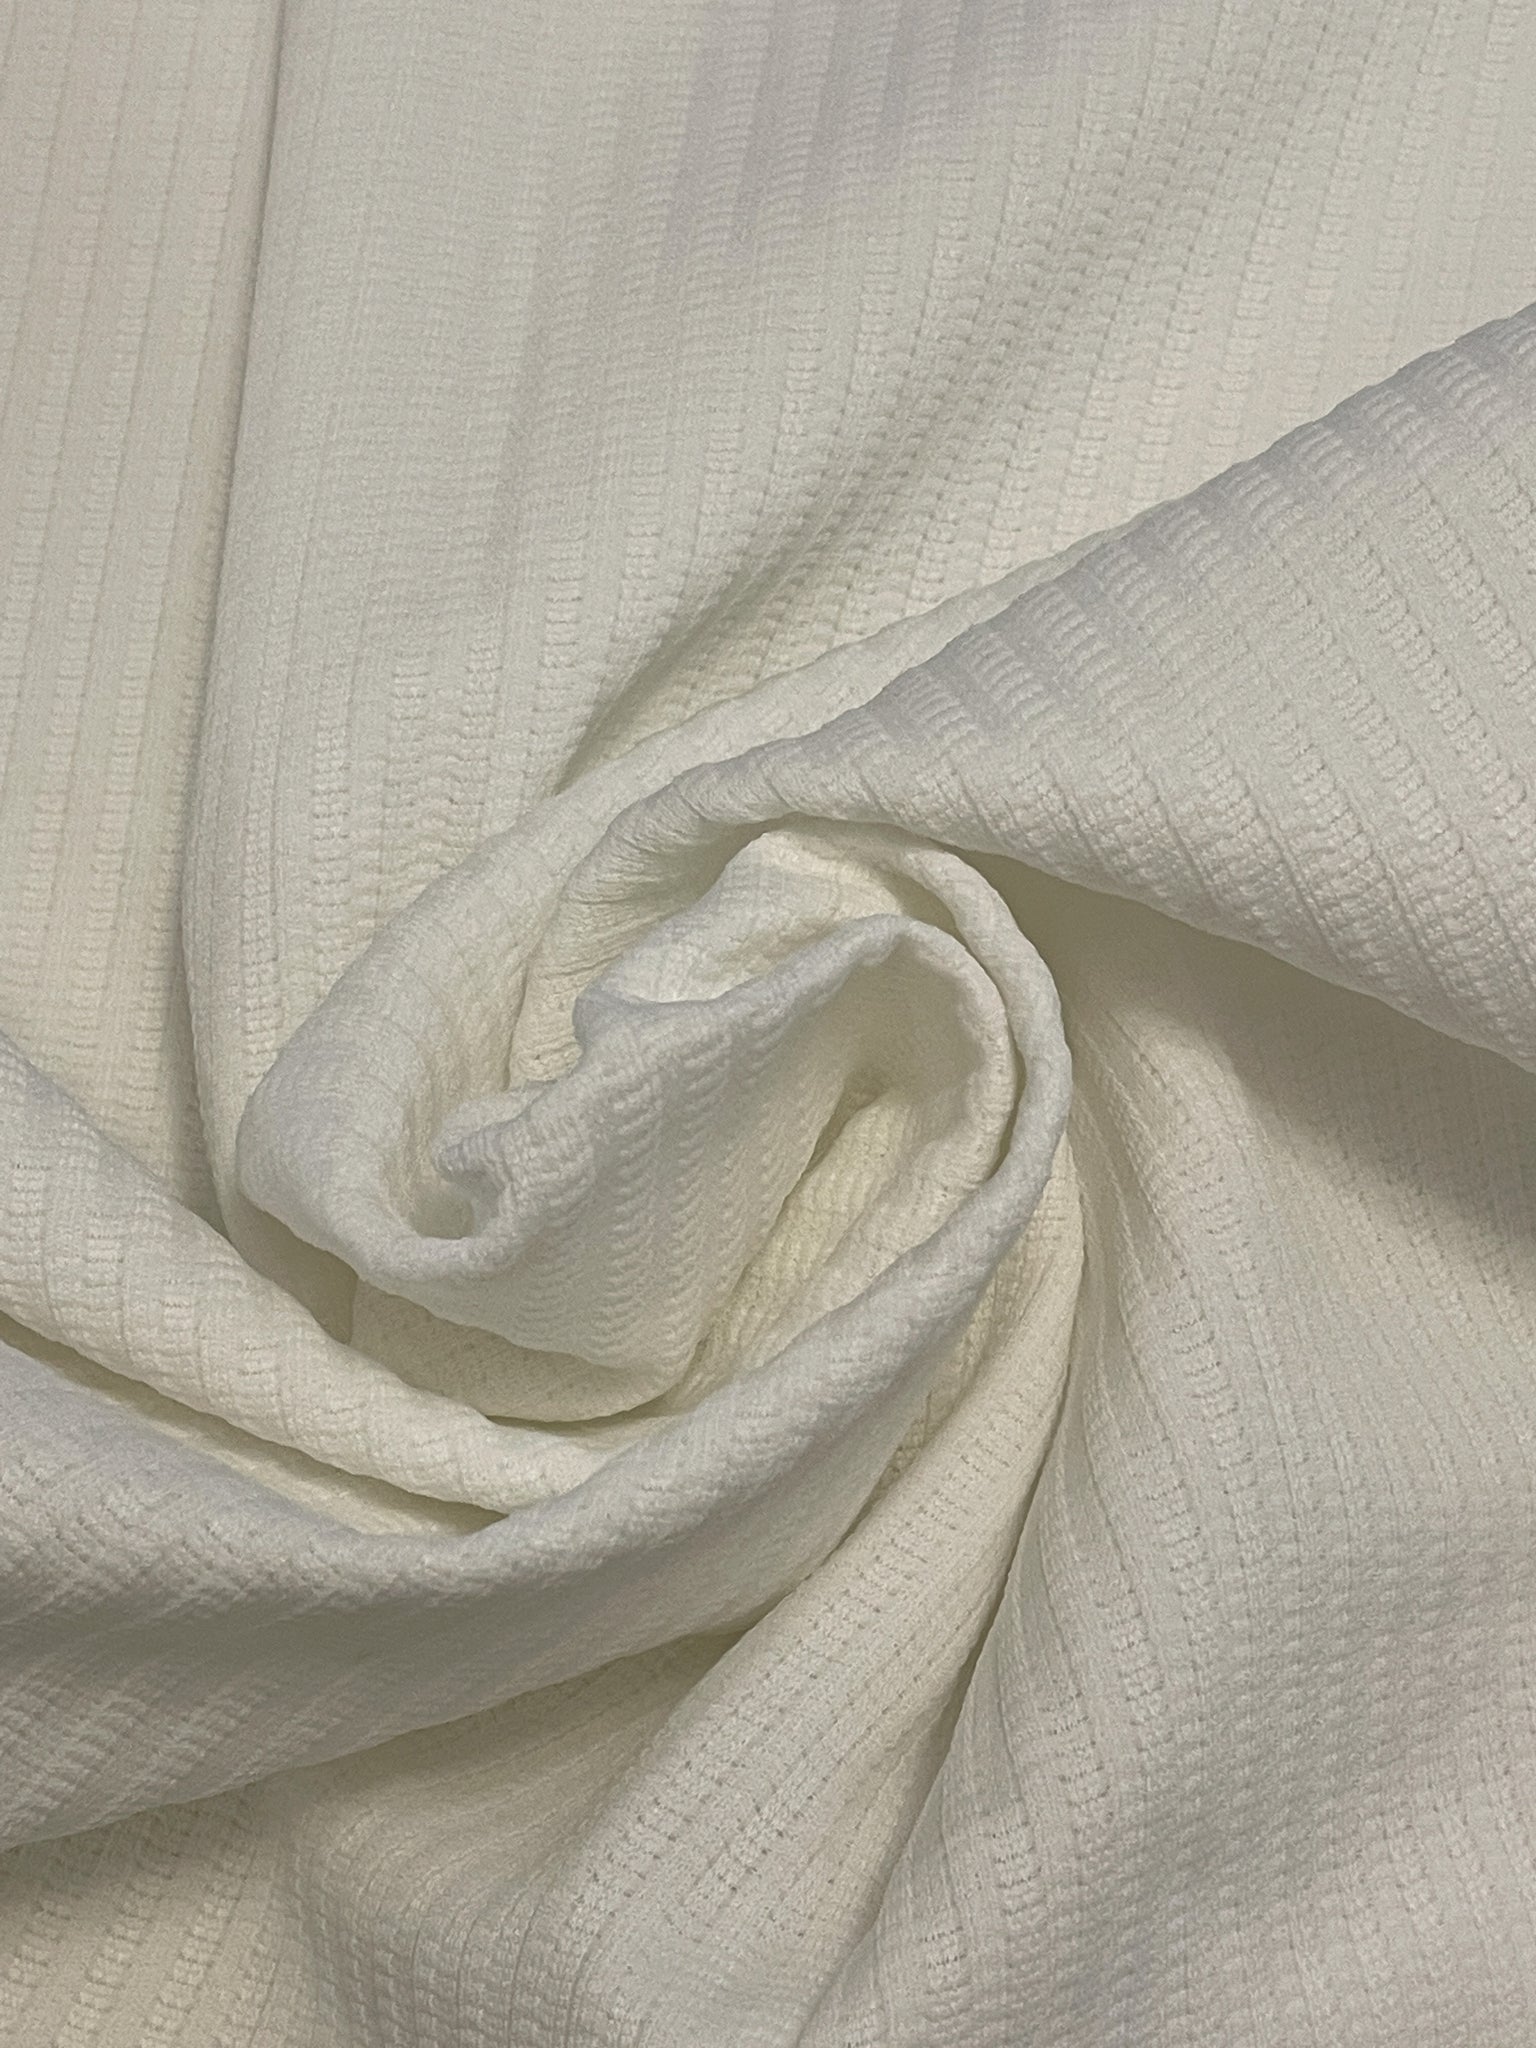 SALE 1 YD Vintage Polyester Double Knit - White